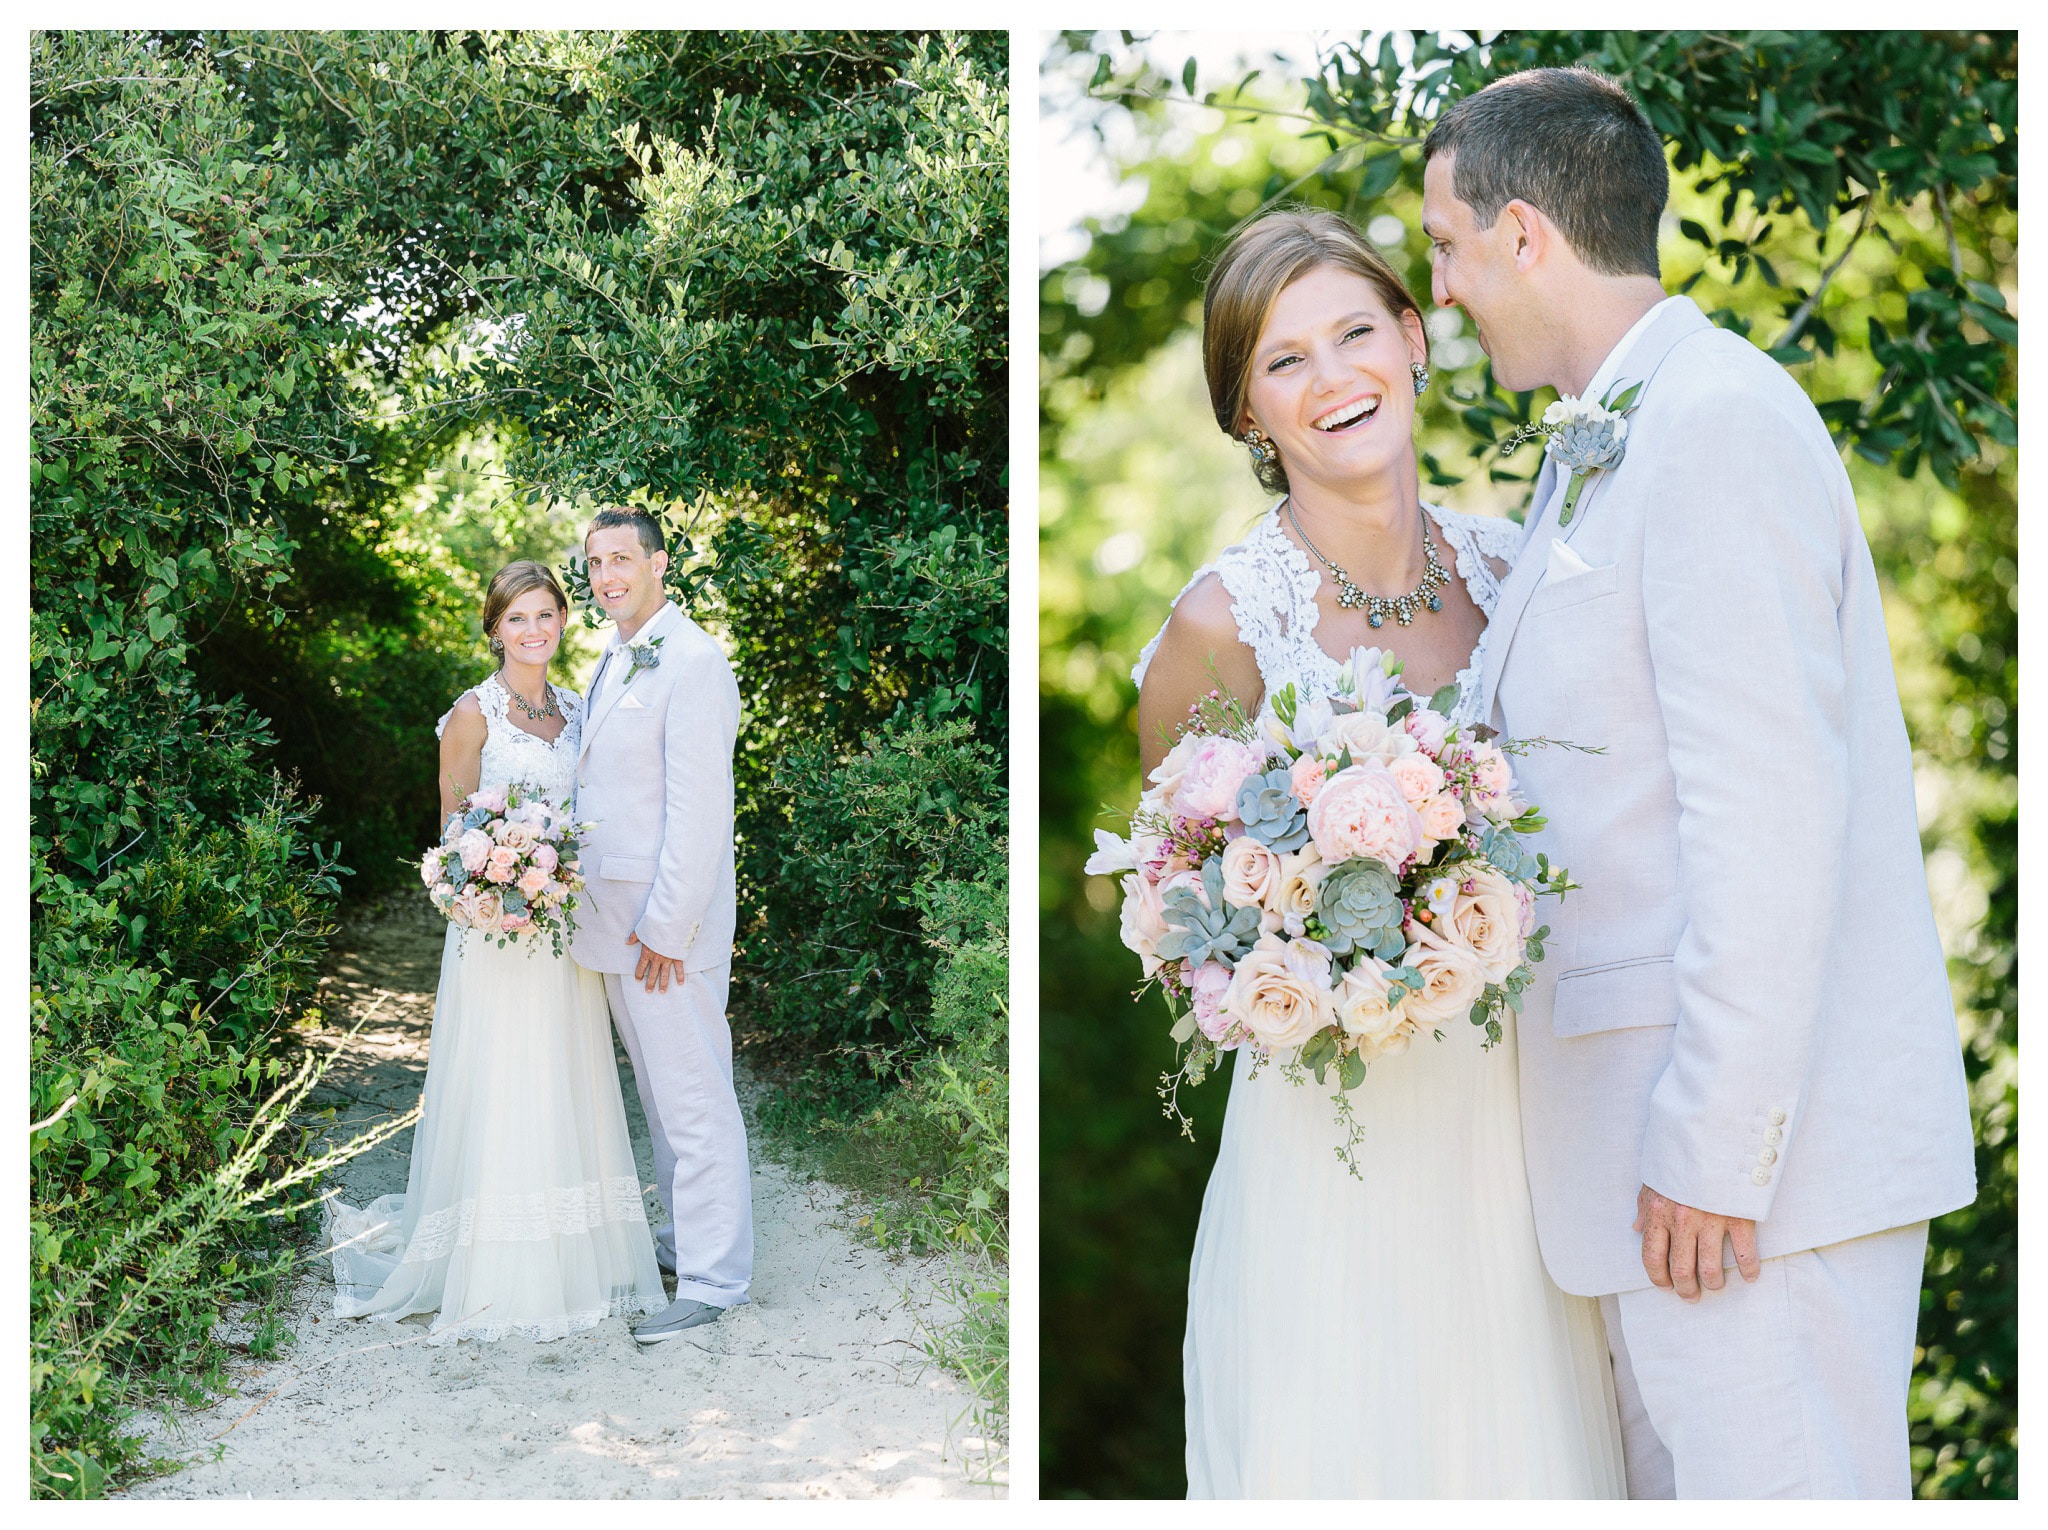 Posing on the Path - Kristie and Grant on a trail in the trees - Myrtle Beach Wedding - Venue - Beach House Gulf Stream Breeze, Beach Realty Catering and Cake - Buttercream Cakes and Catering, LLC Flowers - Callas Florist Event Rentals - Event Works DJ - Scott Shaw